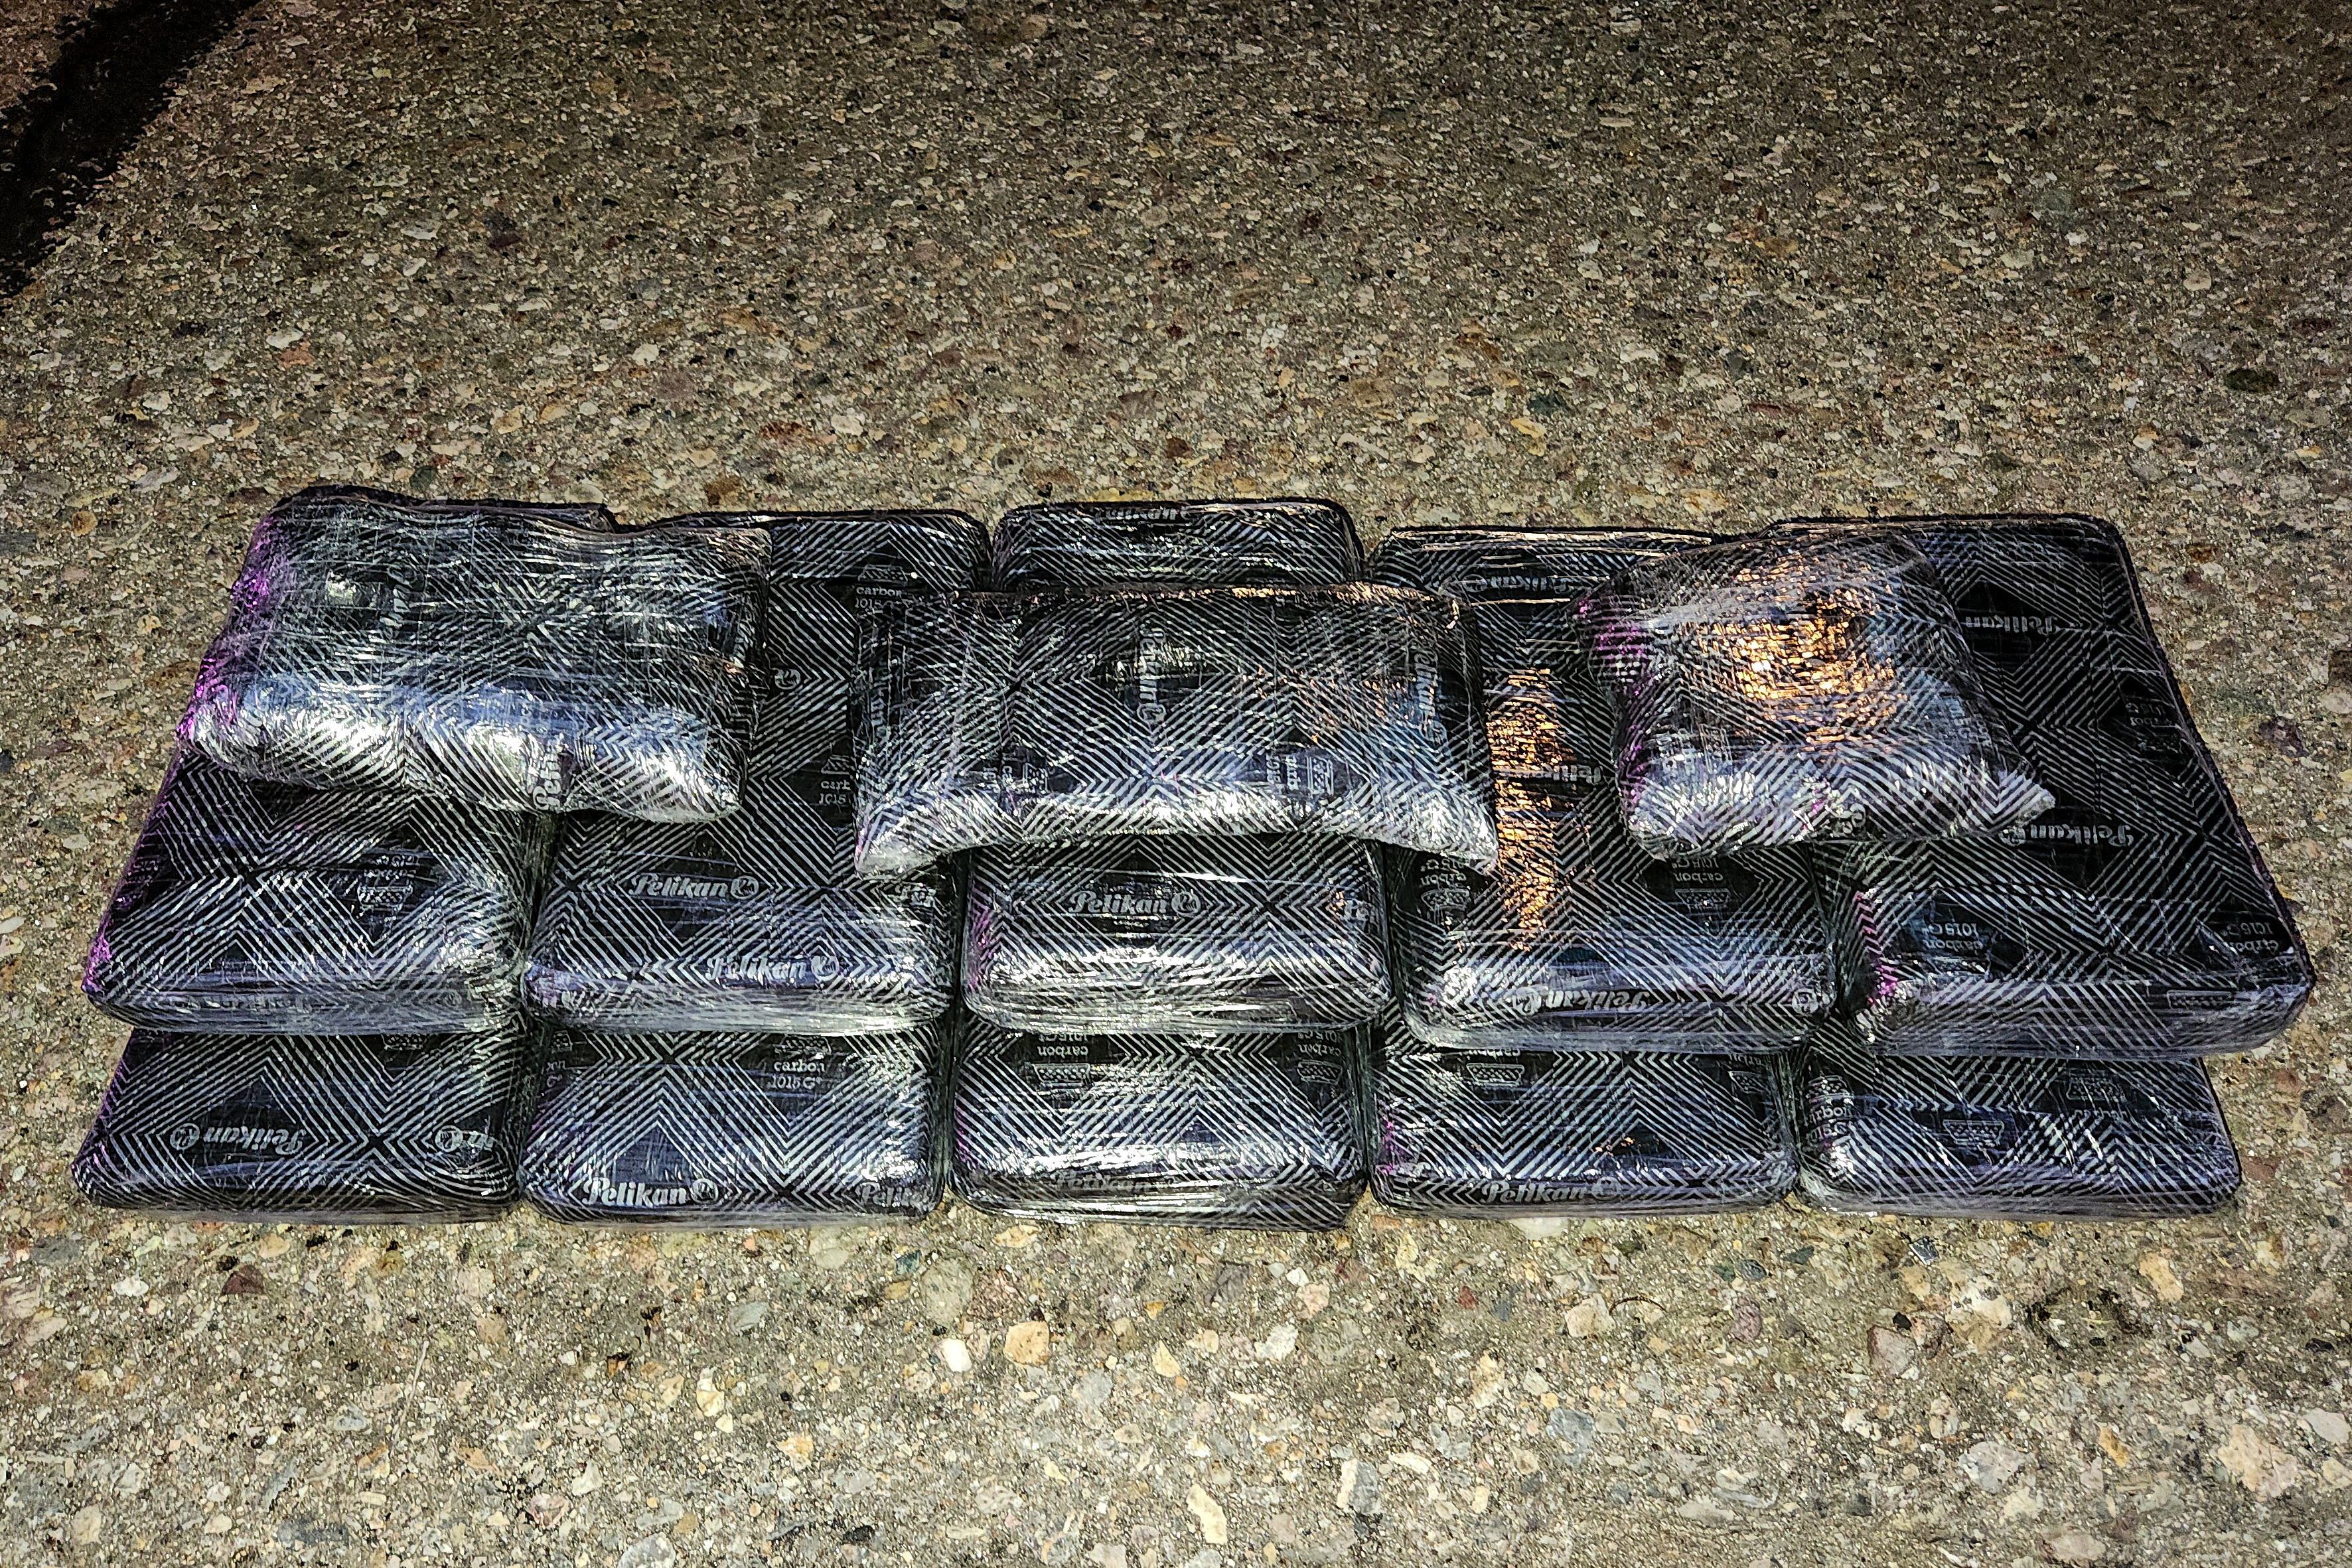 Plastic wrapped black packages containing drugs